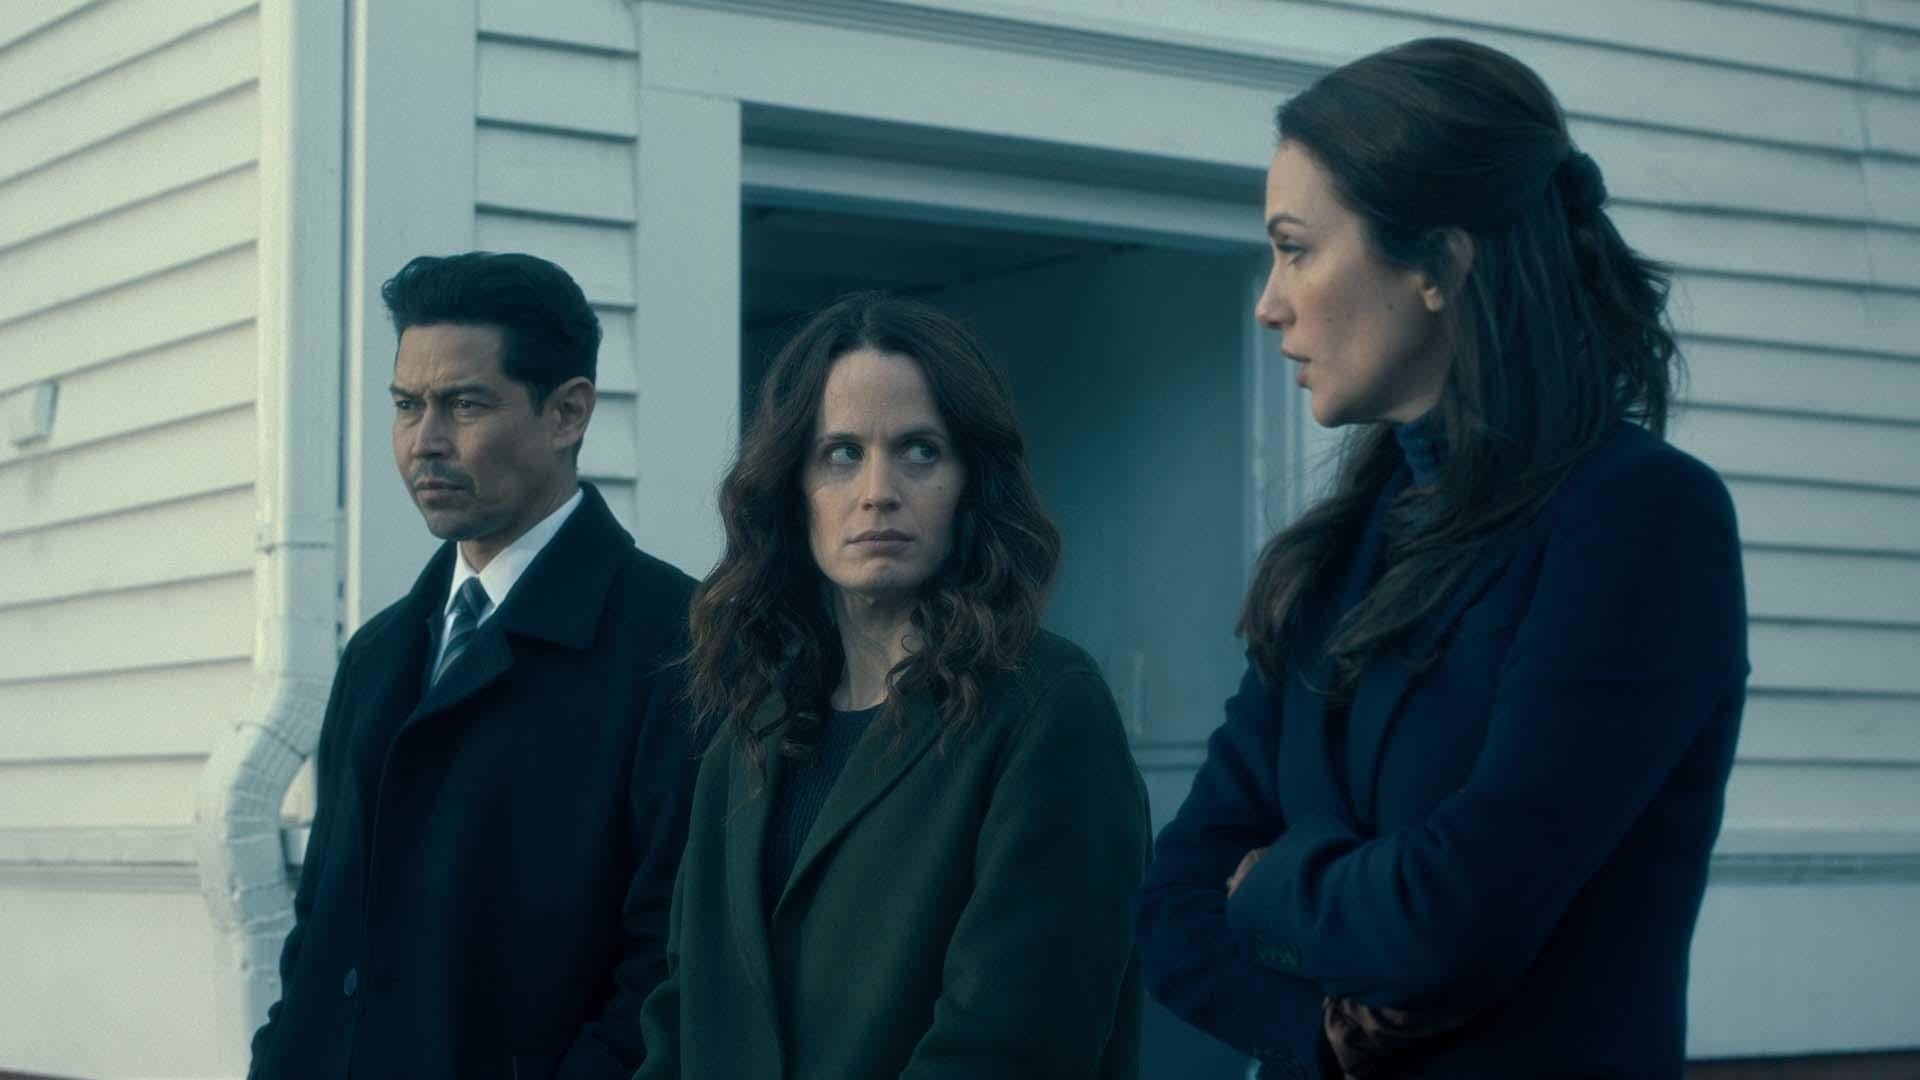 Watch The Haunting of Hill House: Season 1 Episode 2 Full Free